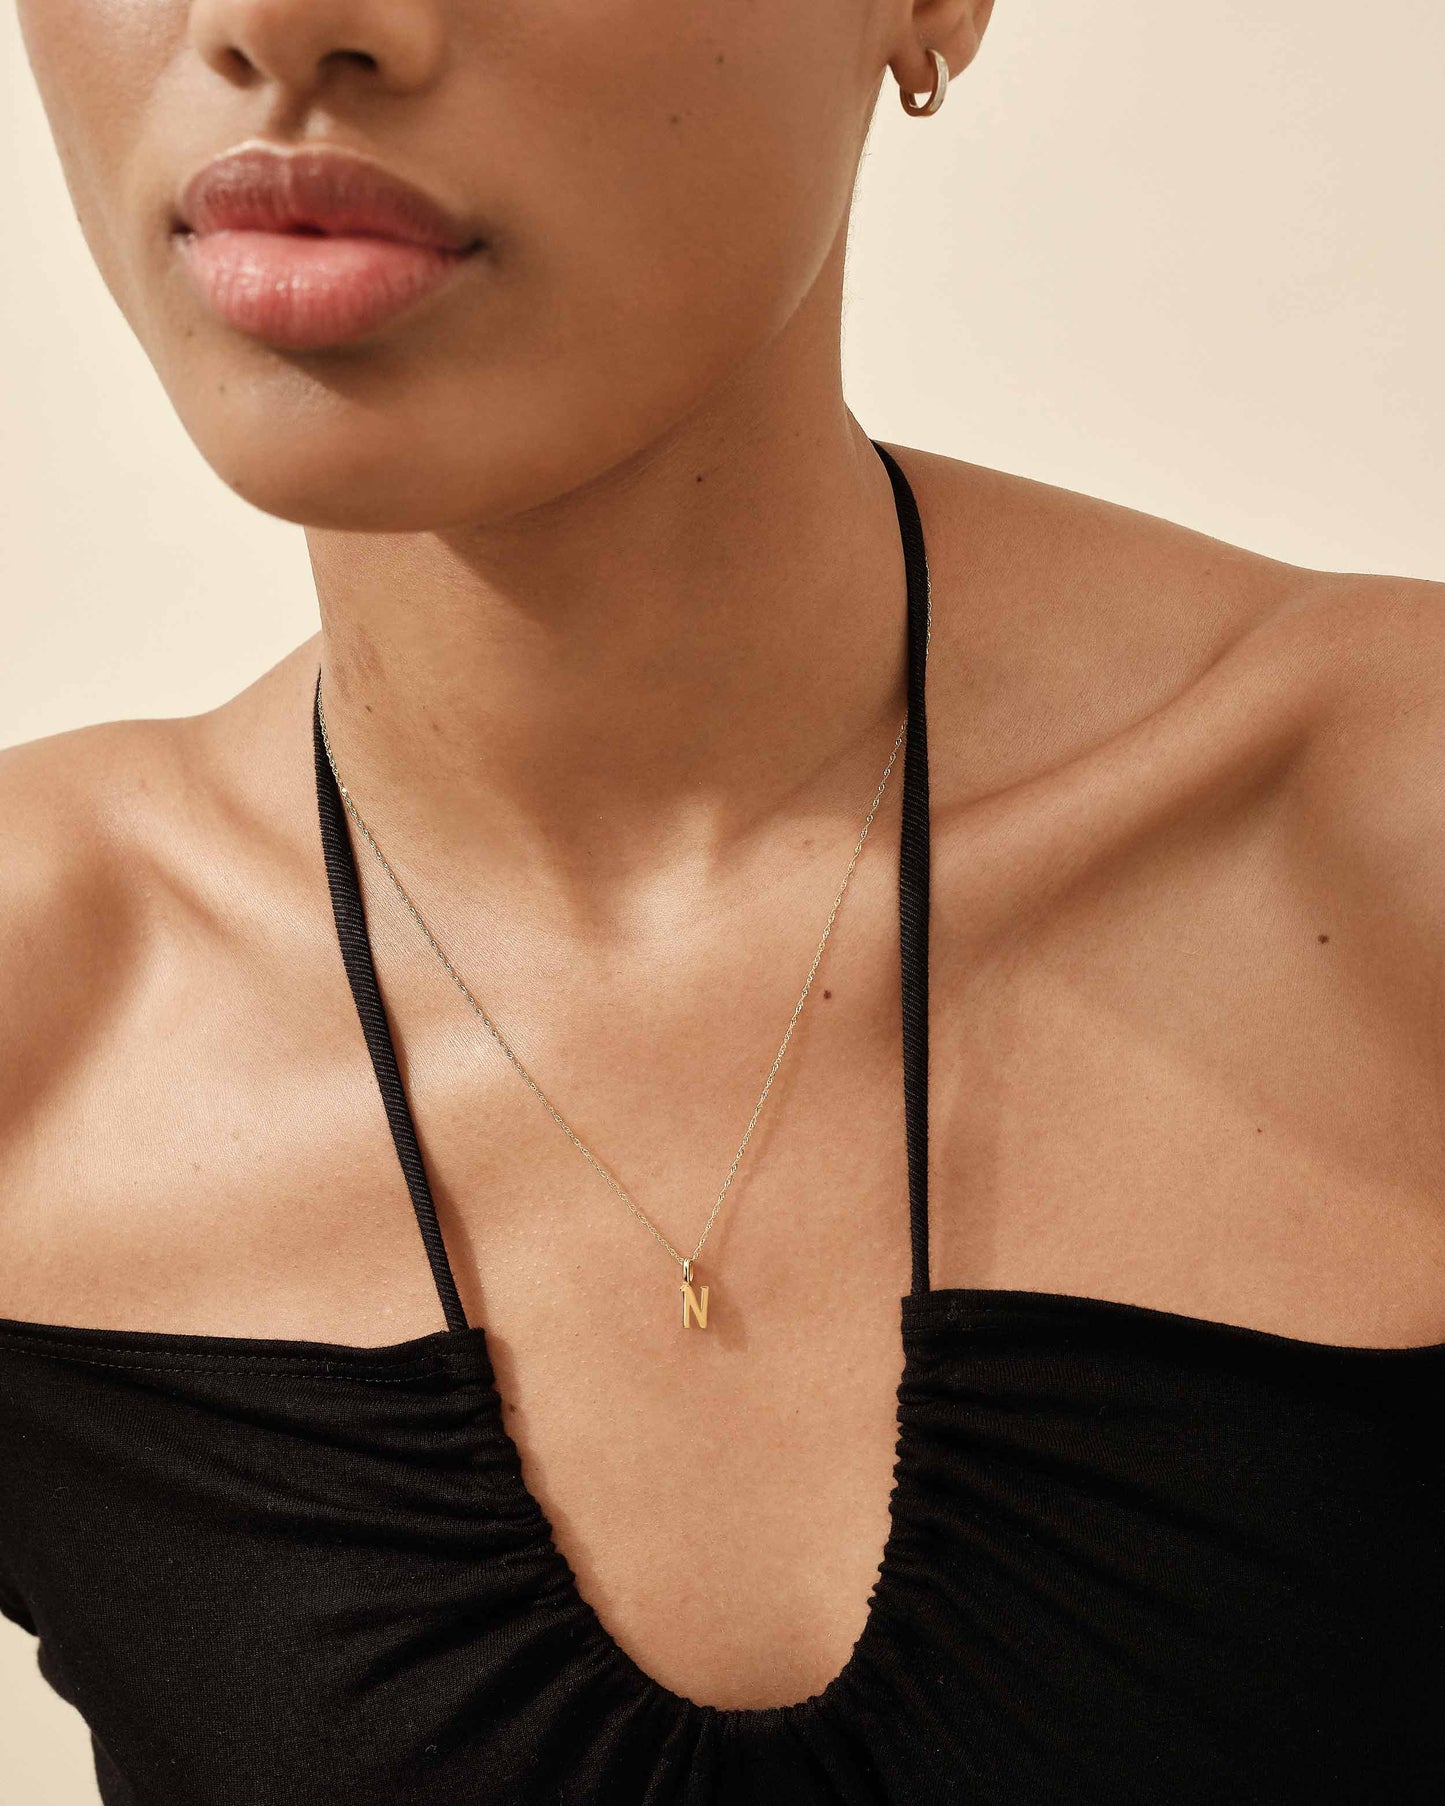 Triple Initial Solid Gold Necklace